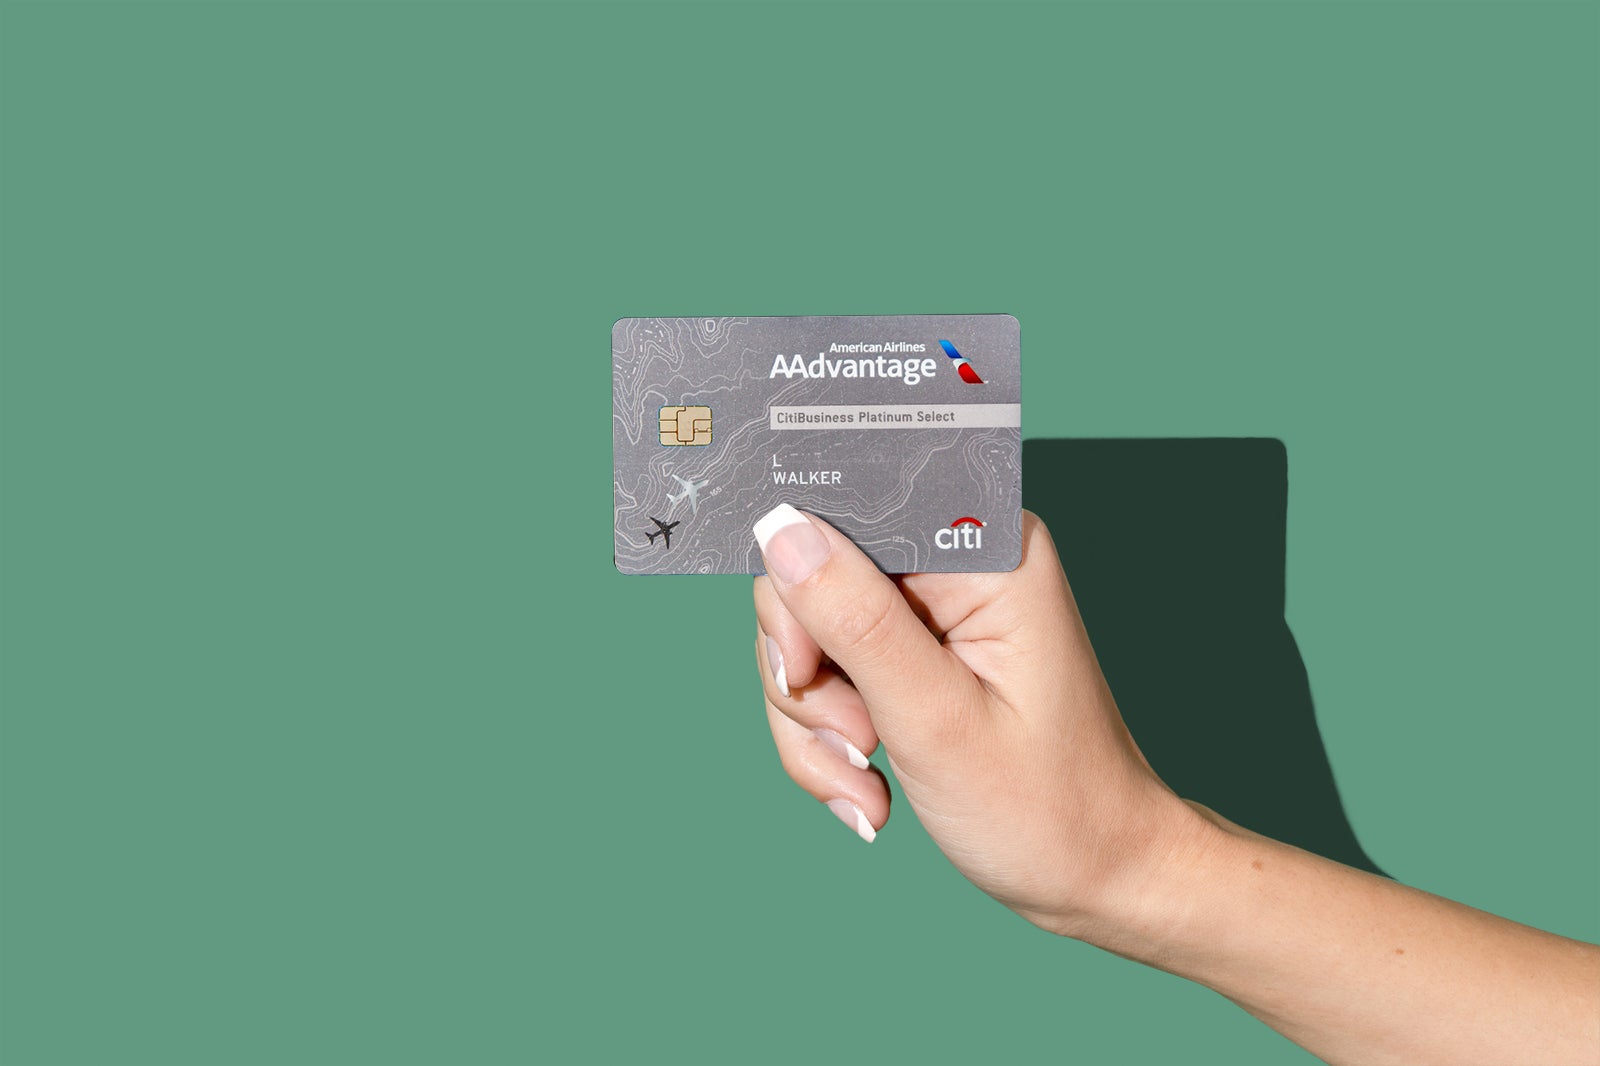 You are currently viewing Score free and discounted inflight Wi-Fi with these credit cards